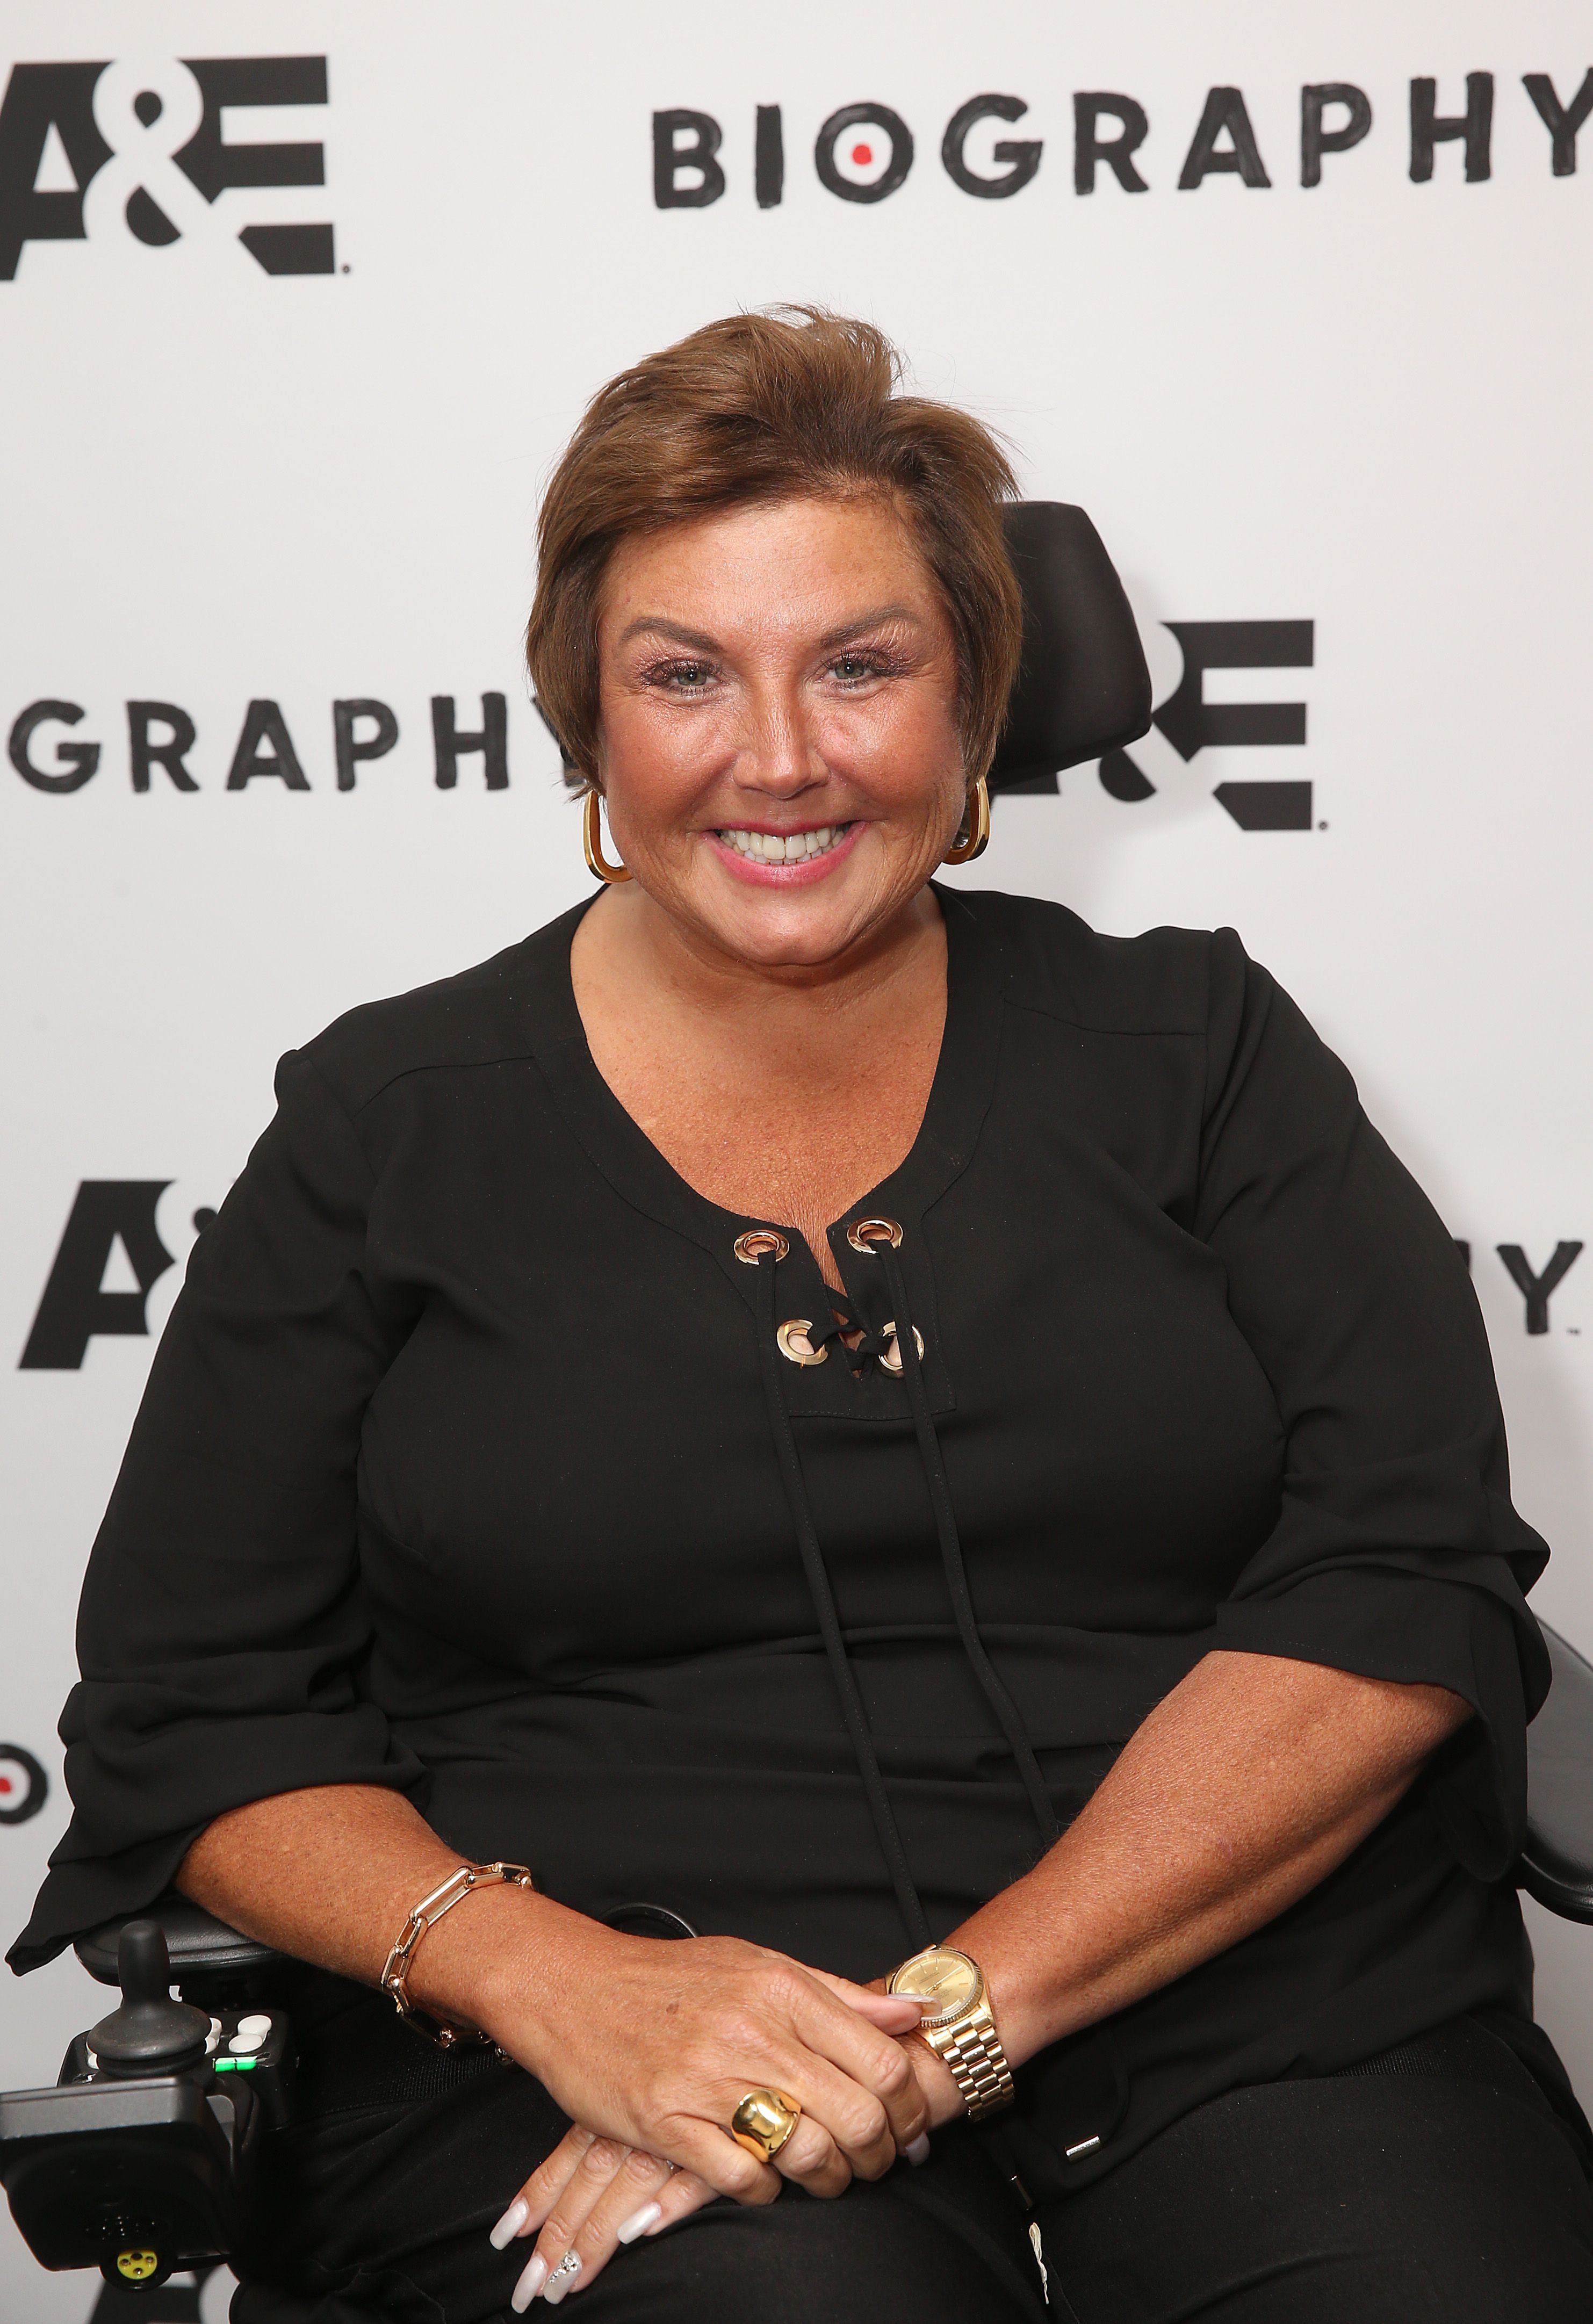 Abby Lee Miller 2019: What happened to the Dance Moms star?